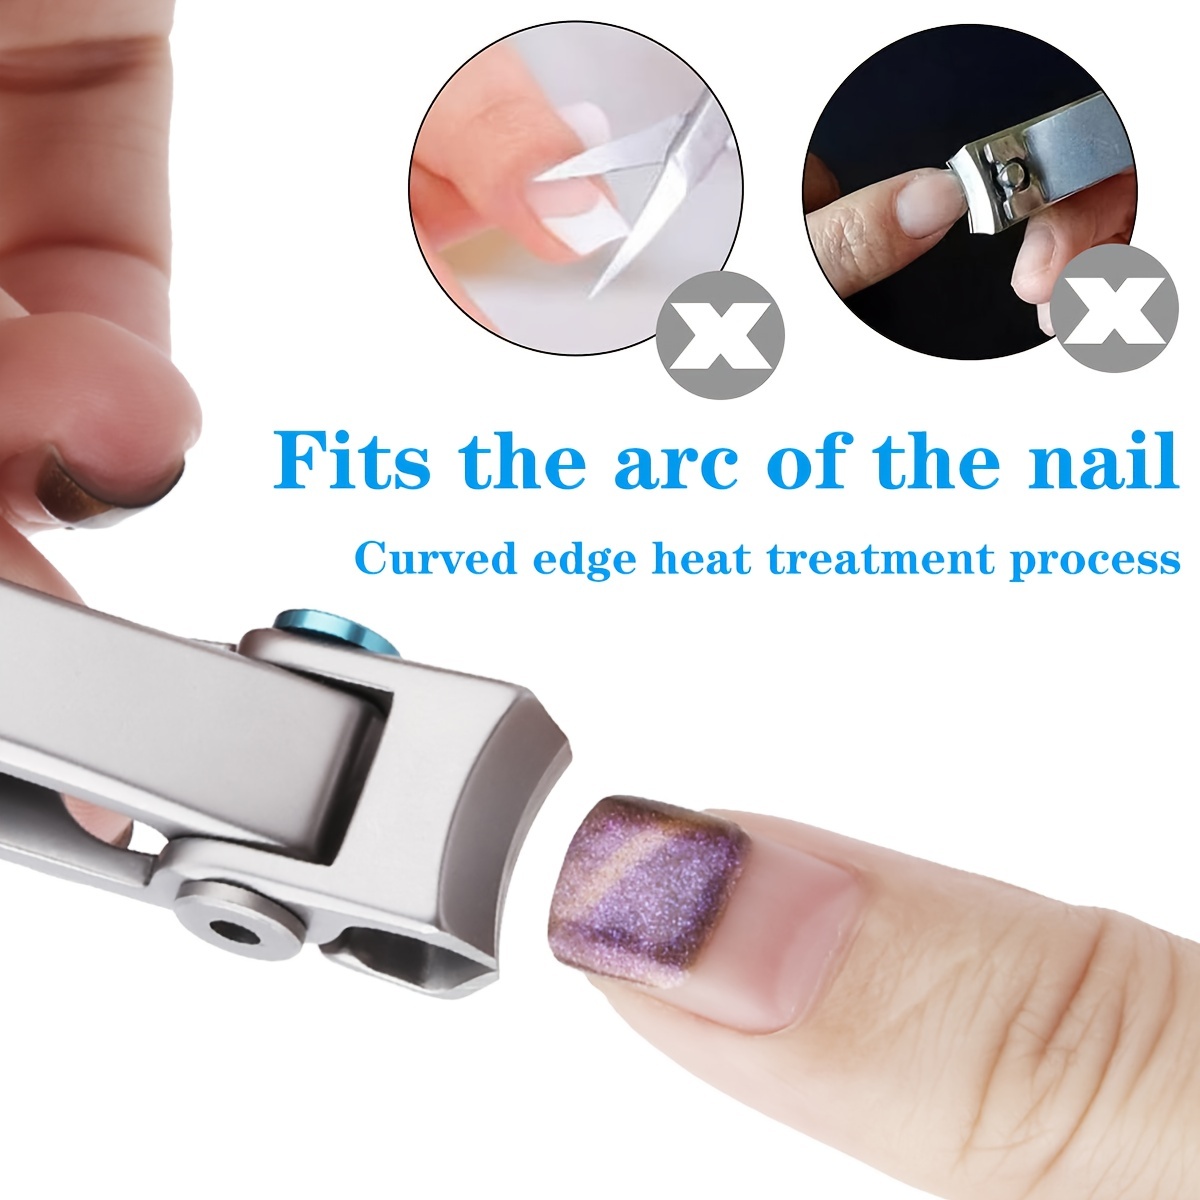 Large Heavy Duty Toe Nail Clipper For Thick Toenails, Manicure